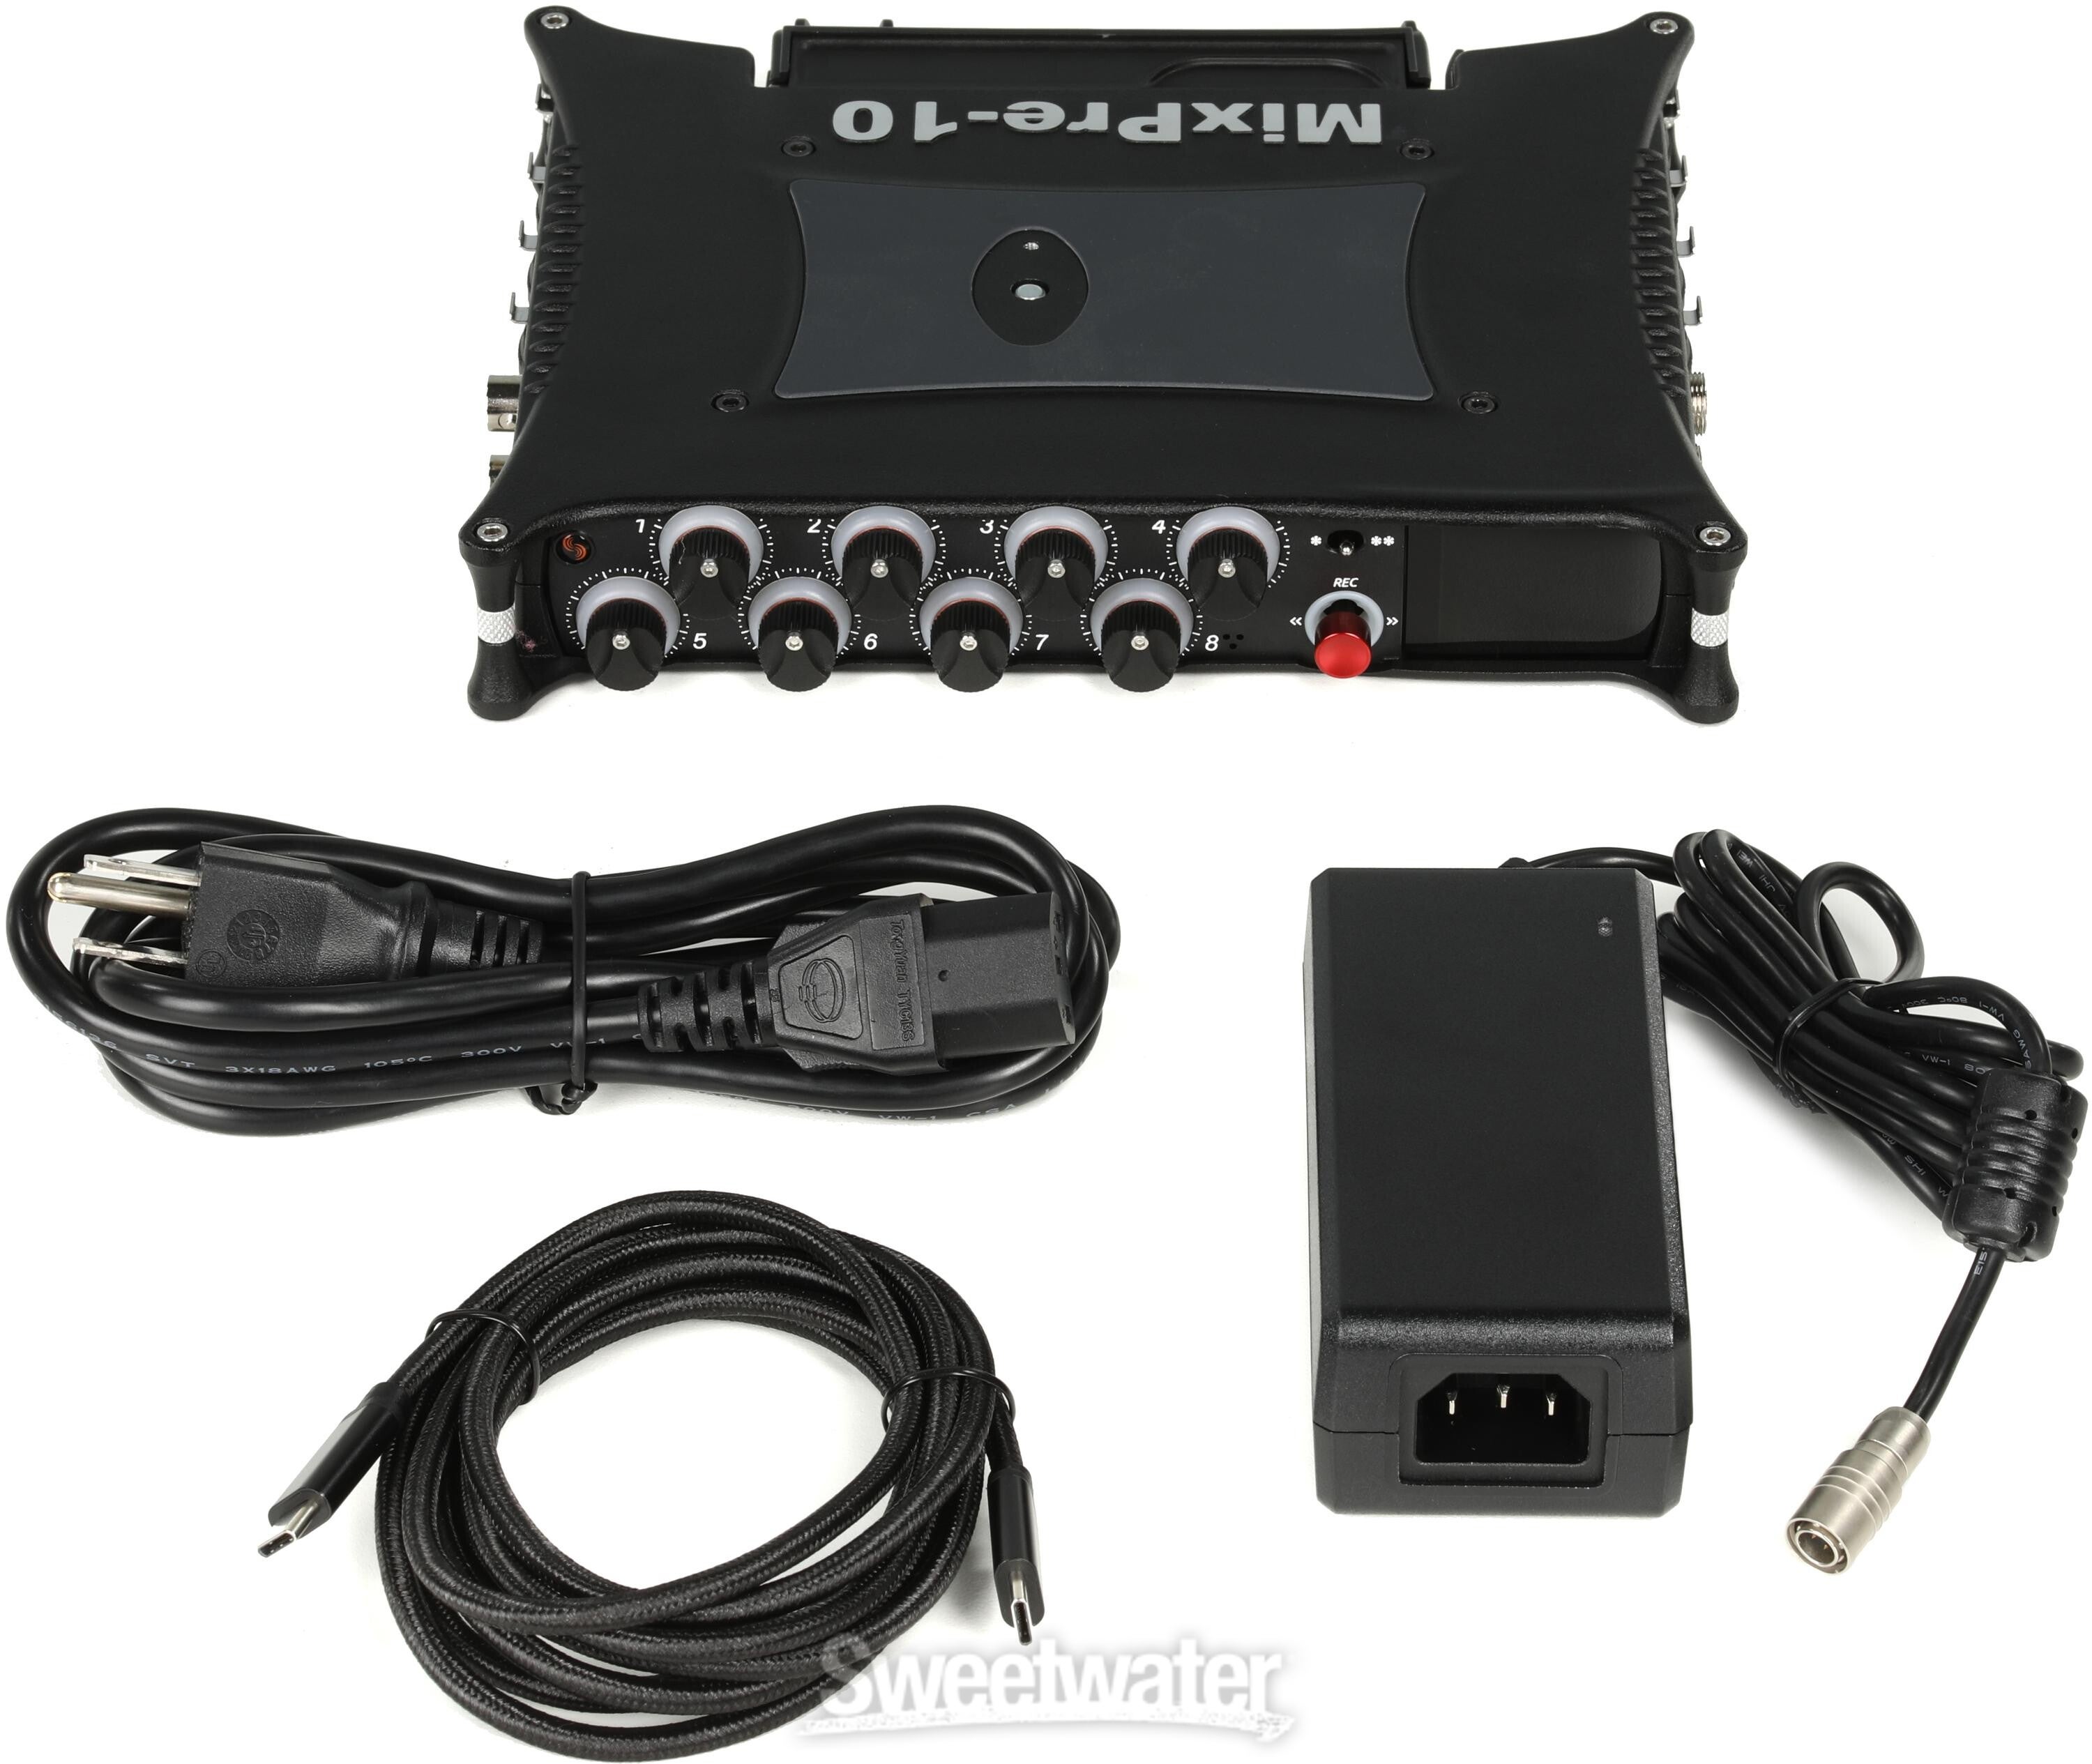 Sound Devices MixPre-10 II Audio Recorder & Interface | Sweetwater